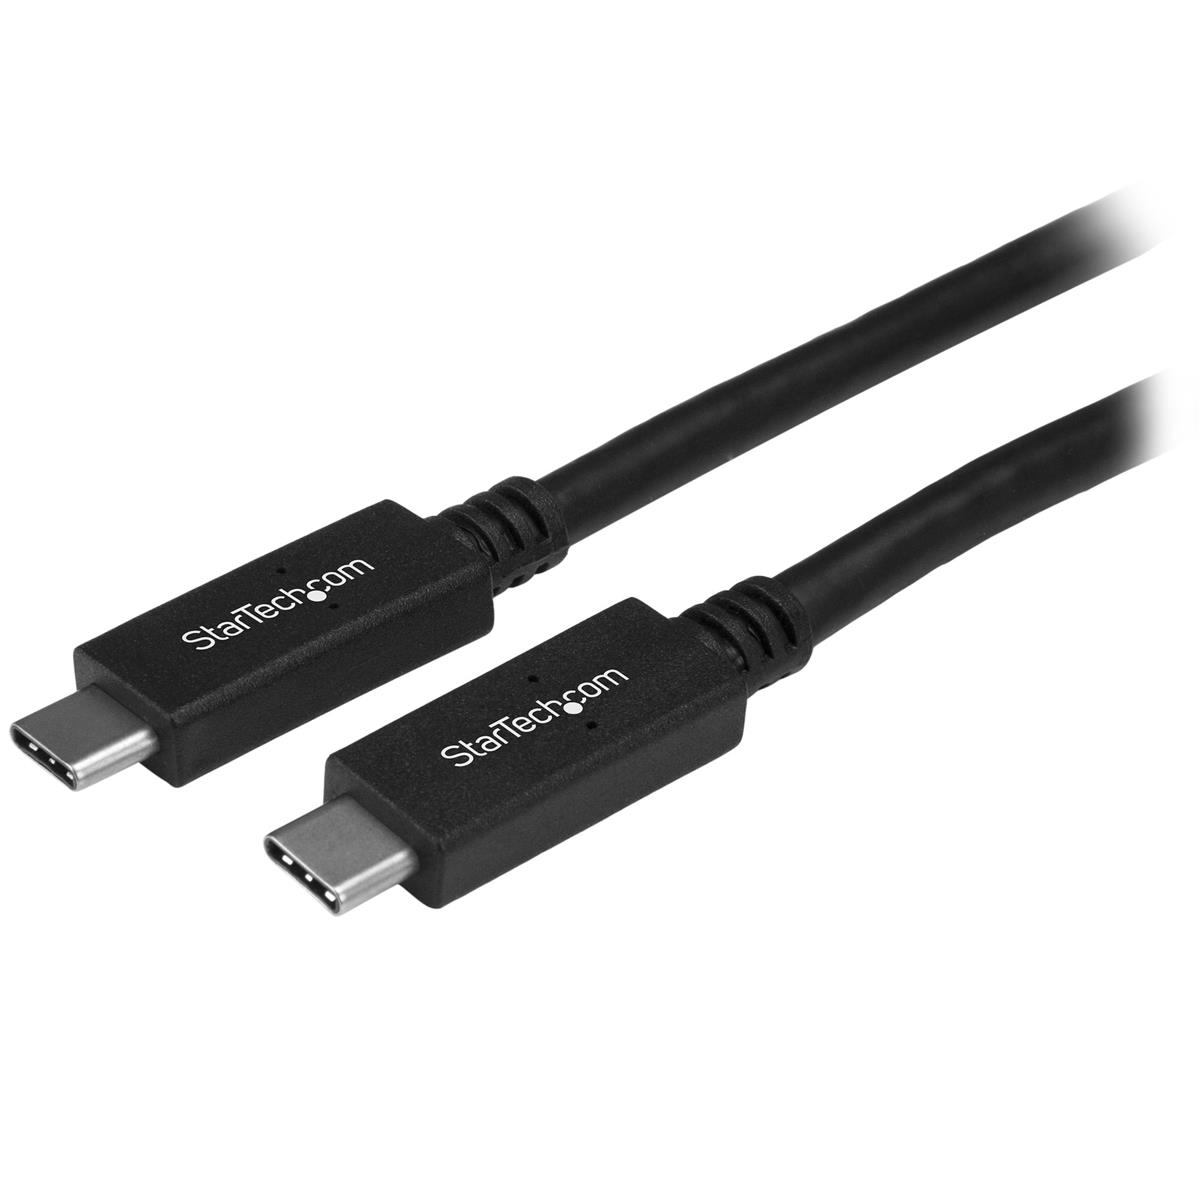 Image of StarTech USB 3.1 Type-C Male to USB Type-C Male Cable